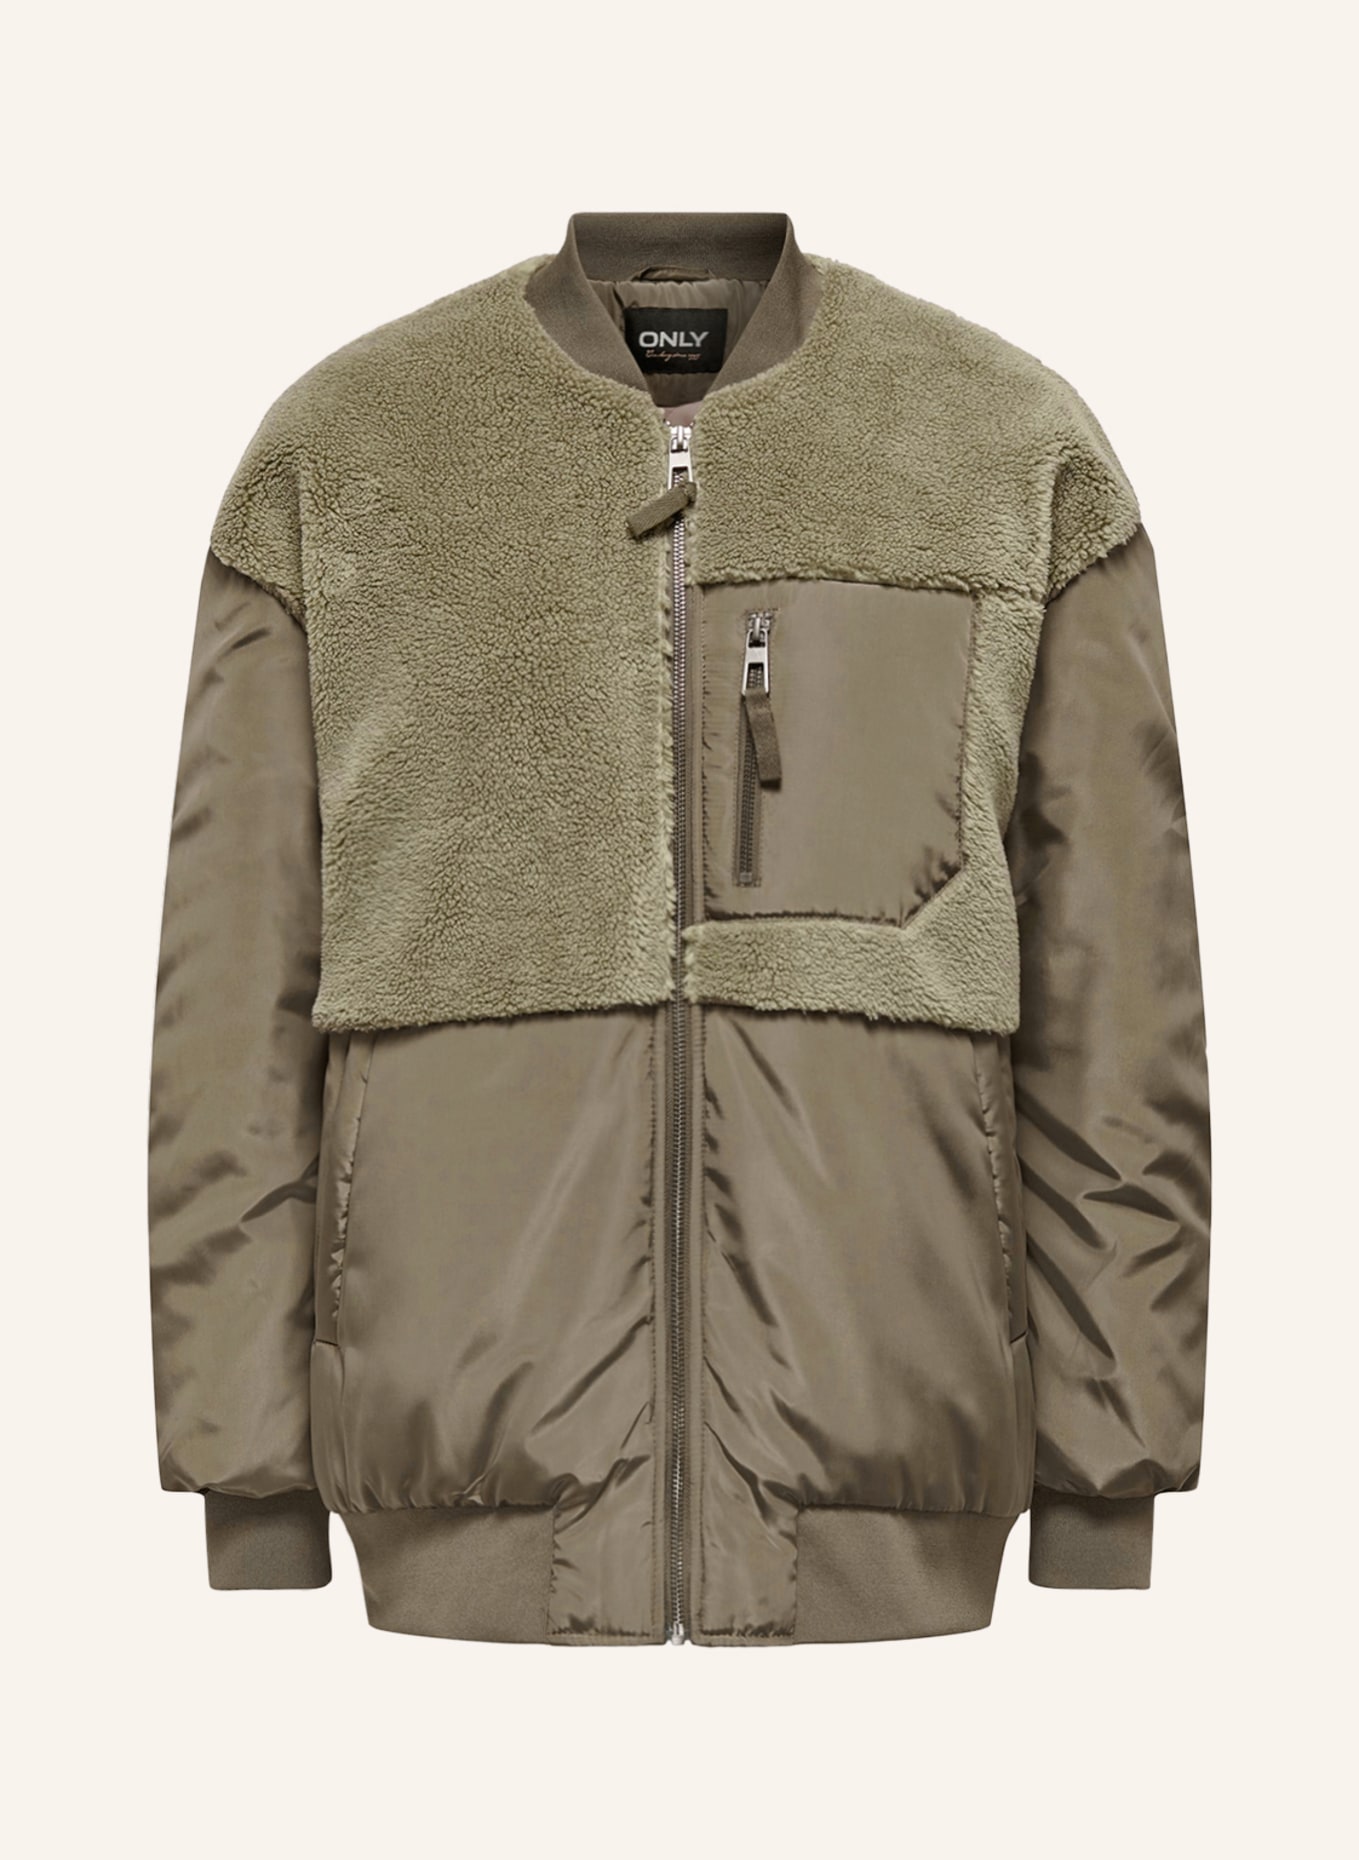 ONLY Bomber jacket in mixed materials, Color: LIGHT GREEN/ OLIVE (Image 1)